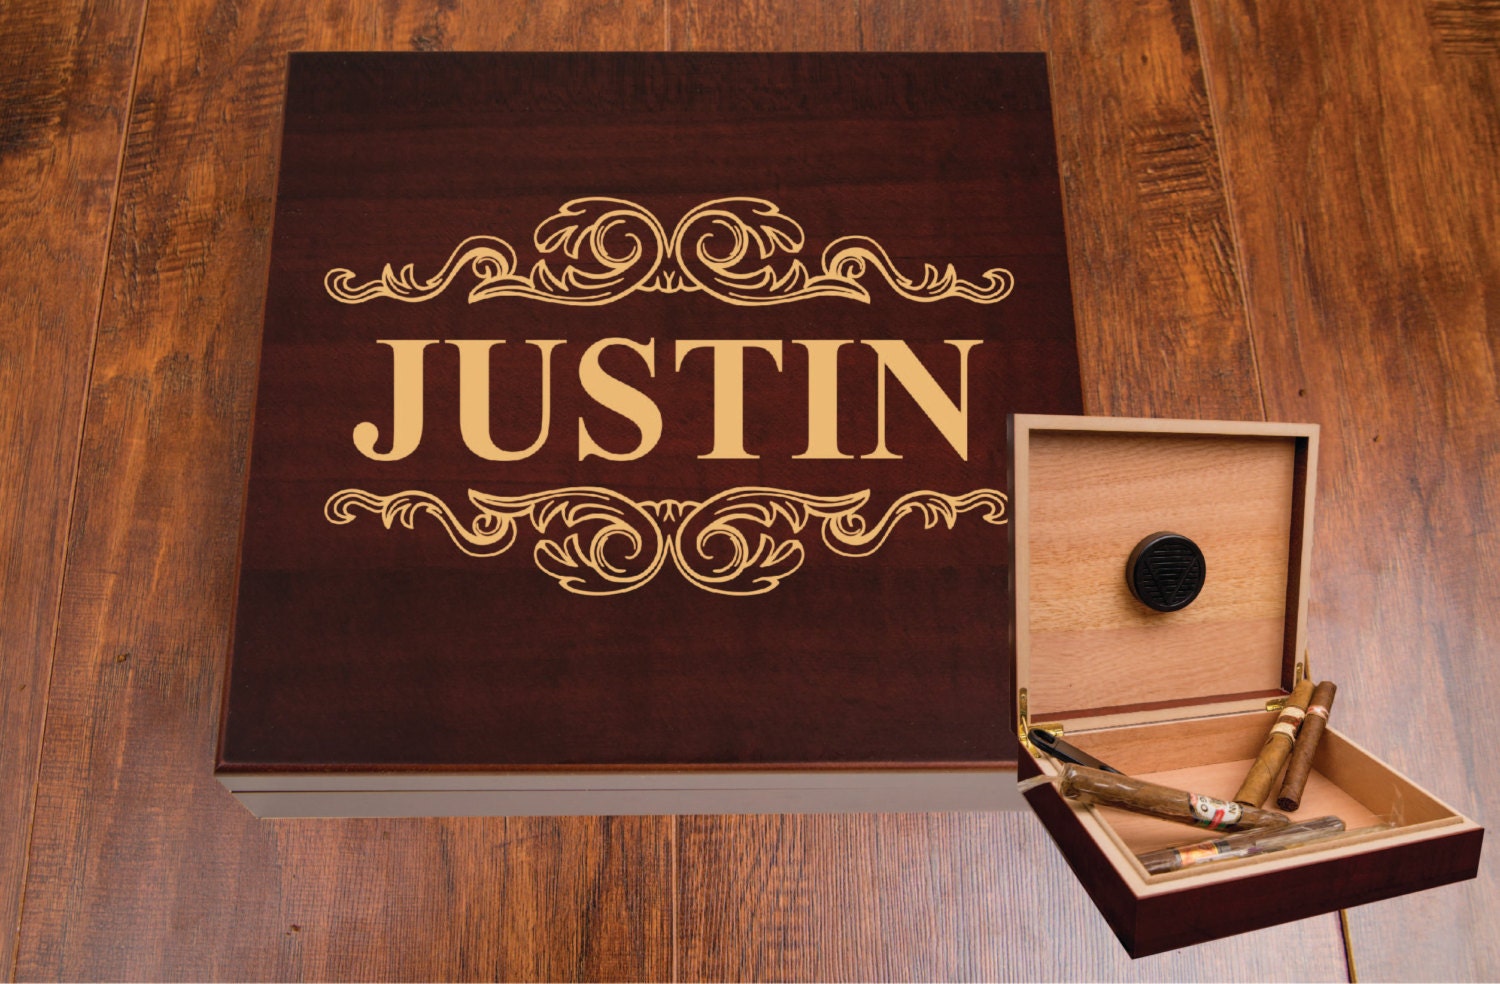 Personalized Cigar Humidor Box for Groomsmen & Best Man Wedding Gift, Unique Wood Engraved Gift